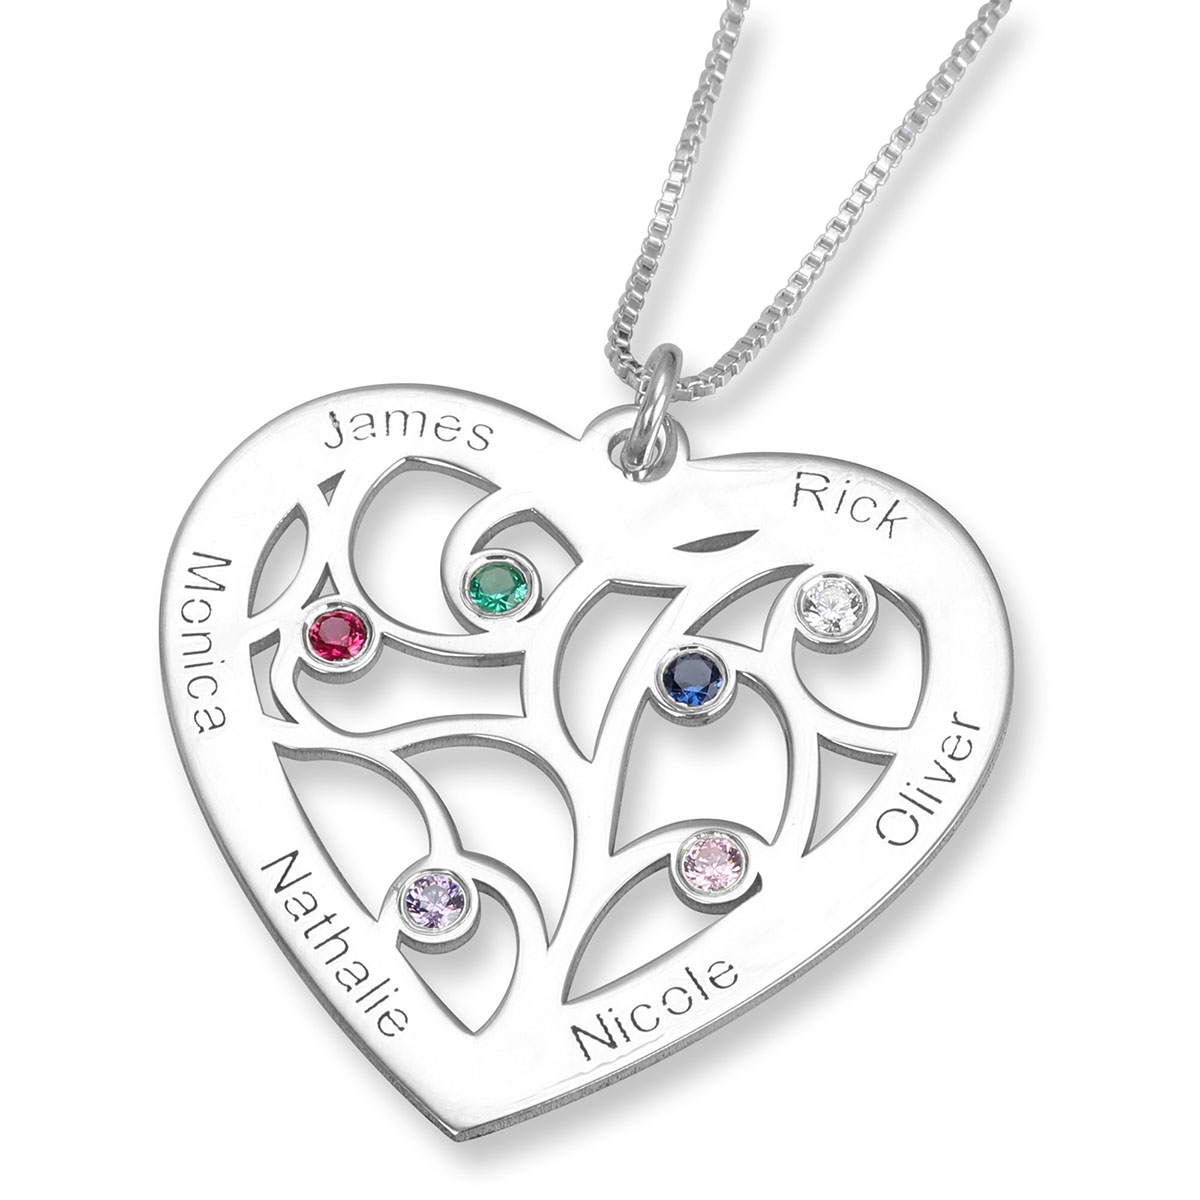 English/Hebrew Heart-Shaped Name Necklace With Family Tree Design and Birthstones - 1